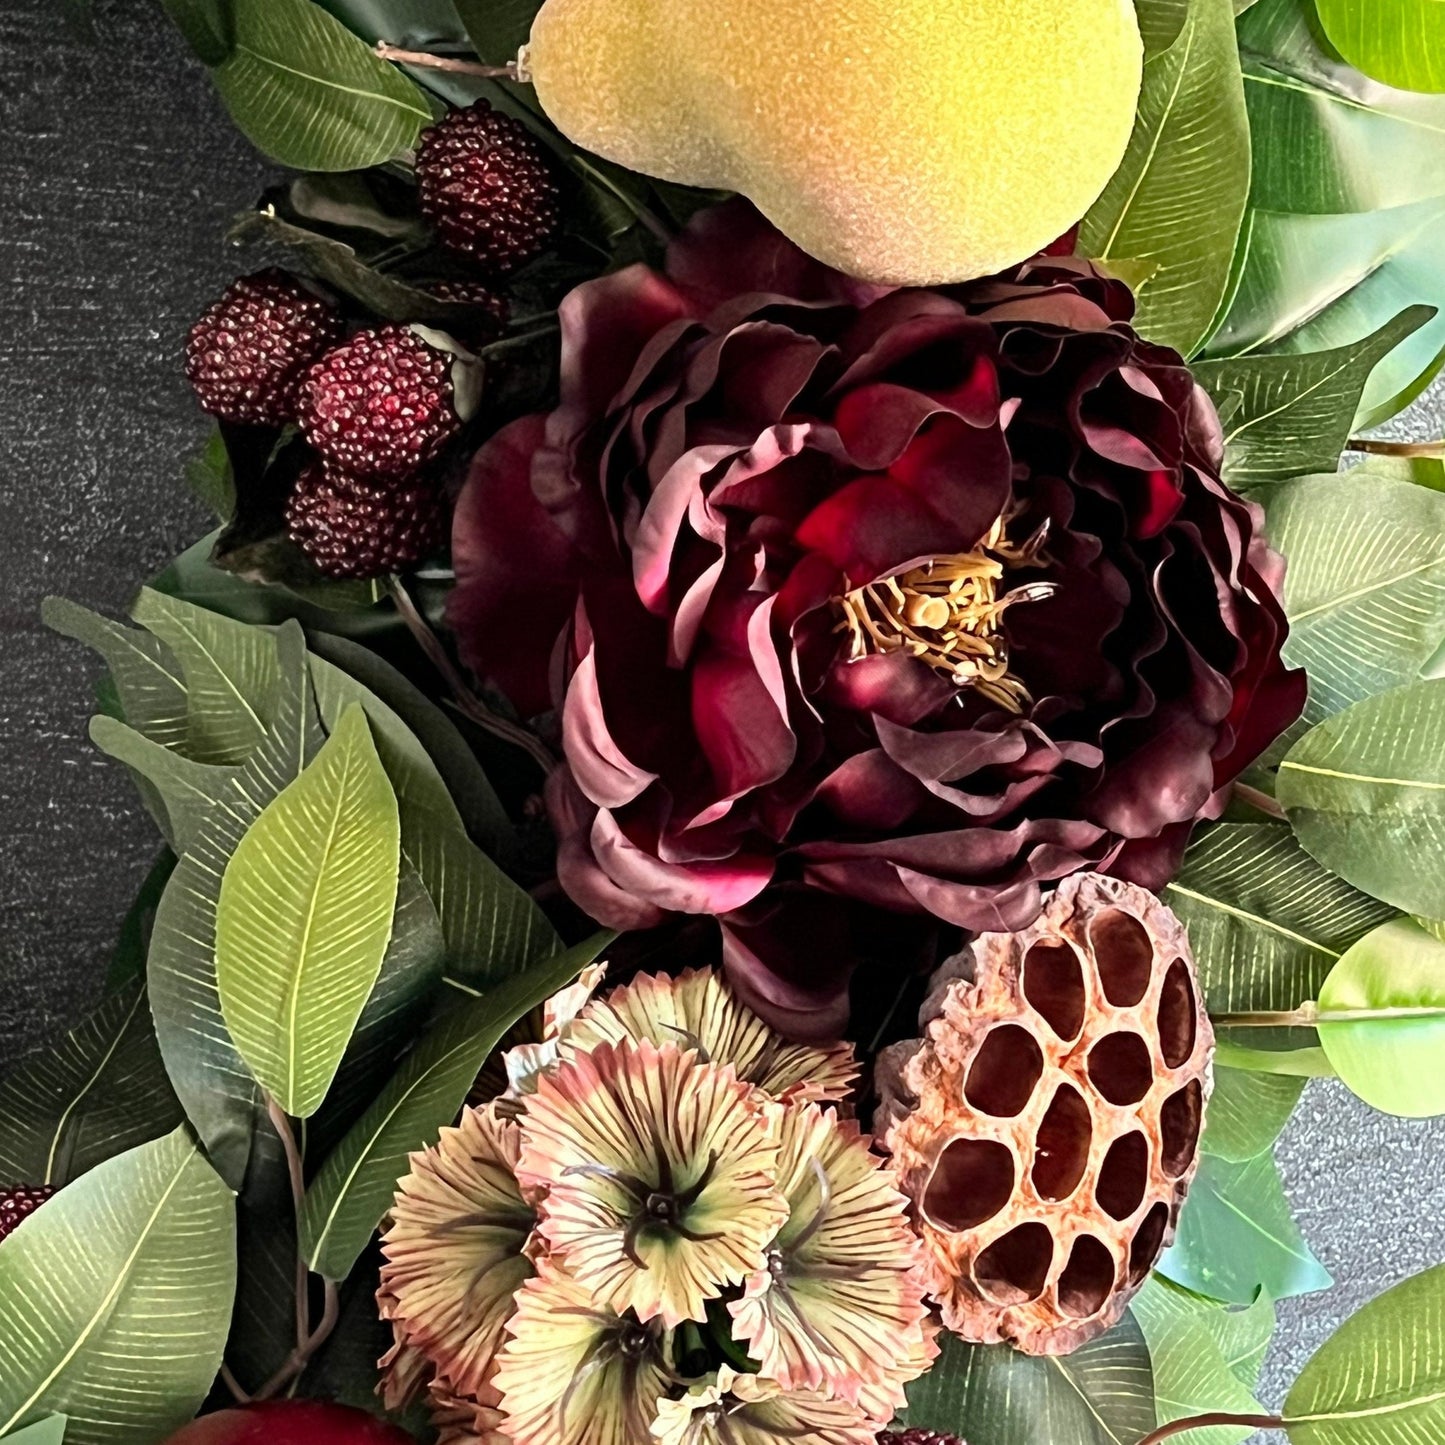 Load image into Gallery viewer, Fall Pear, Plum and Peony Wreath
